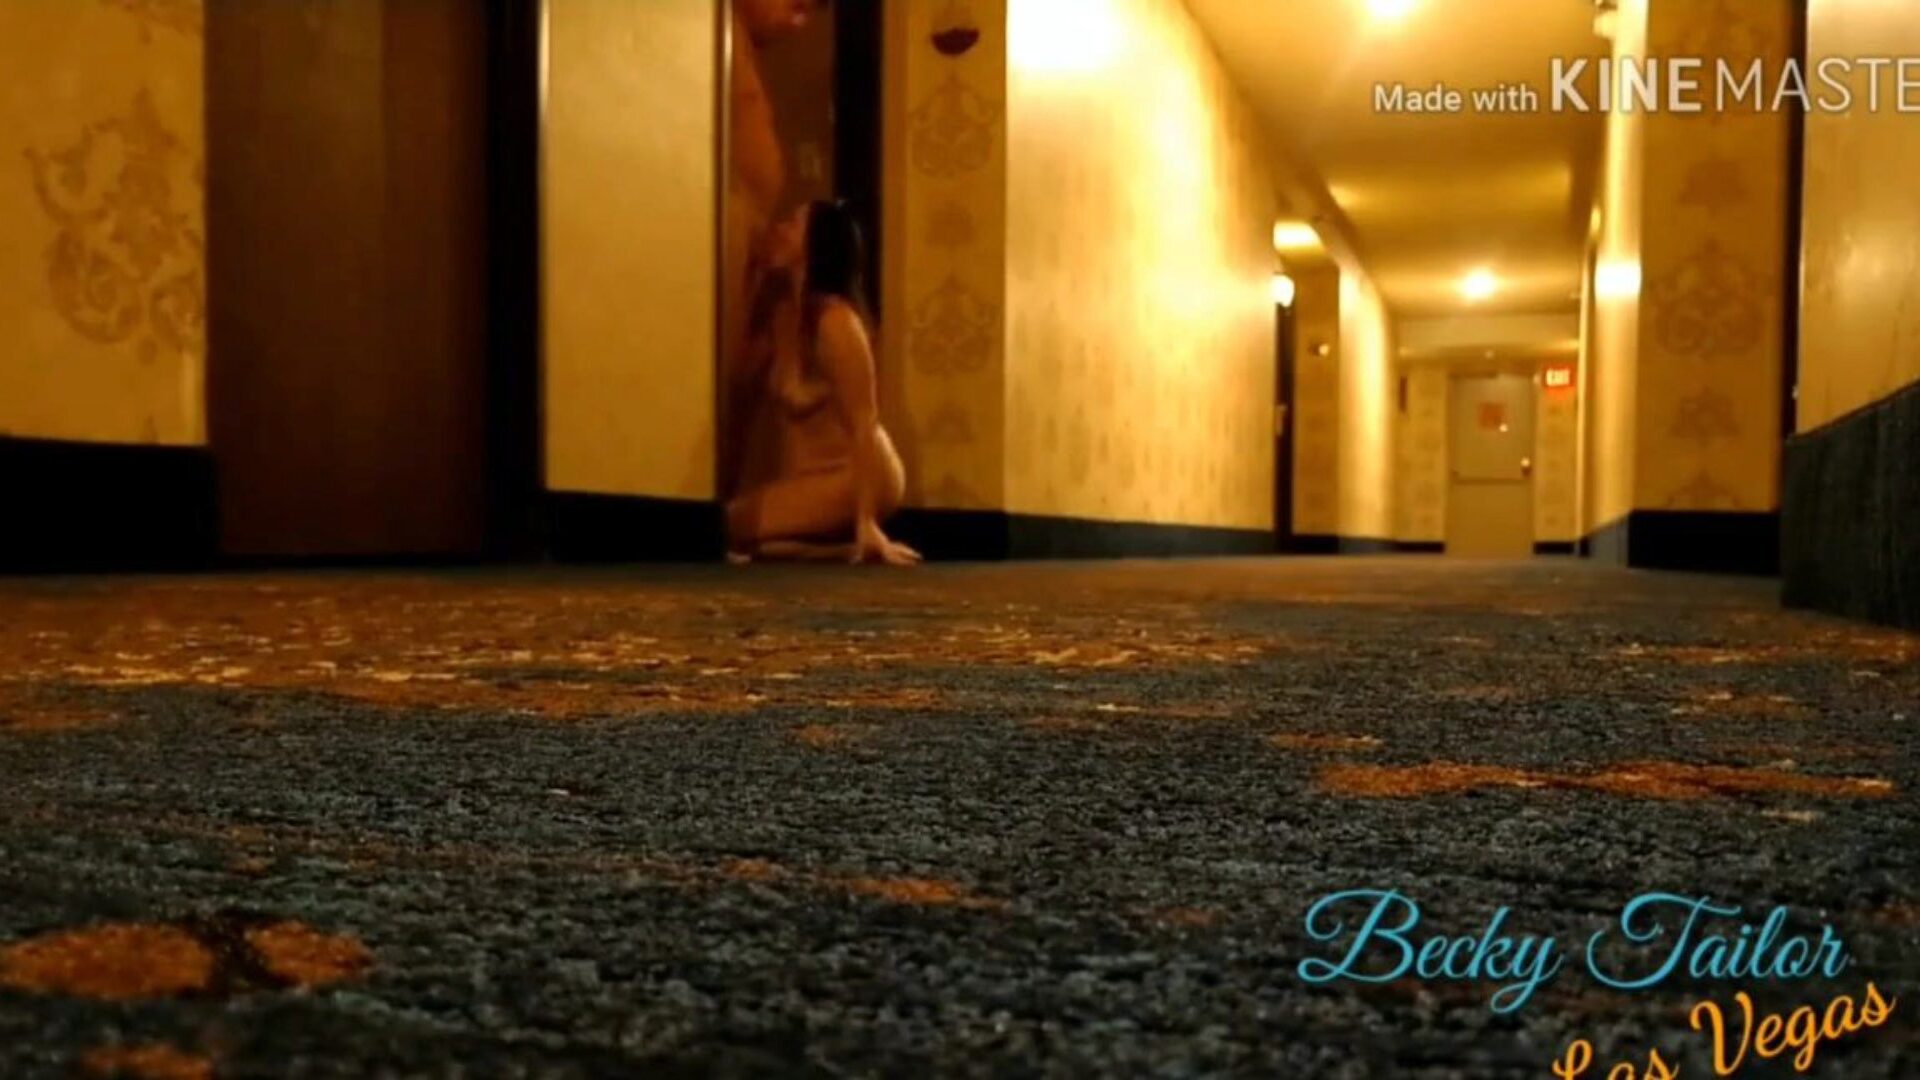 Fucking Wife in Vegas Hotel Hallway, Free Porn 0b: xHamster Watch Fucking Wife in Vegas Hotel Hallway video on xHamster, the most excellent HD hook-up tube website with tons of free-for-all MILF Voyeur & Hidden Camera porno clips